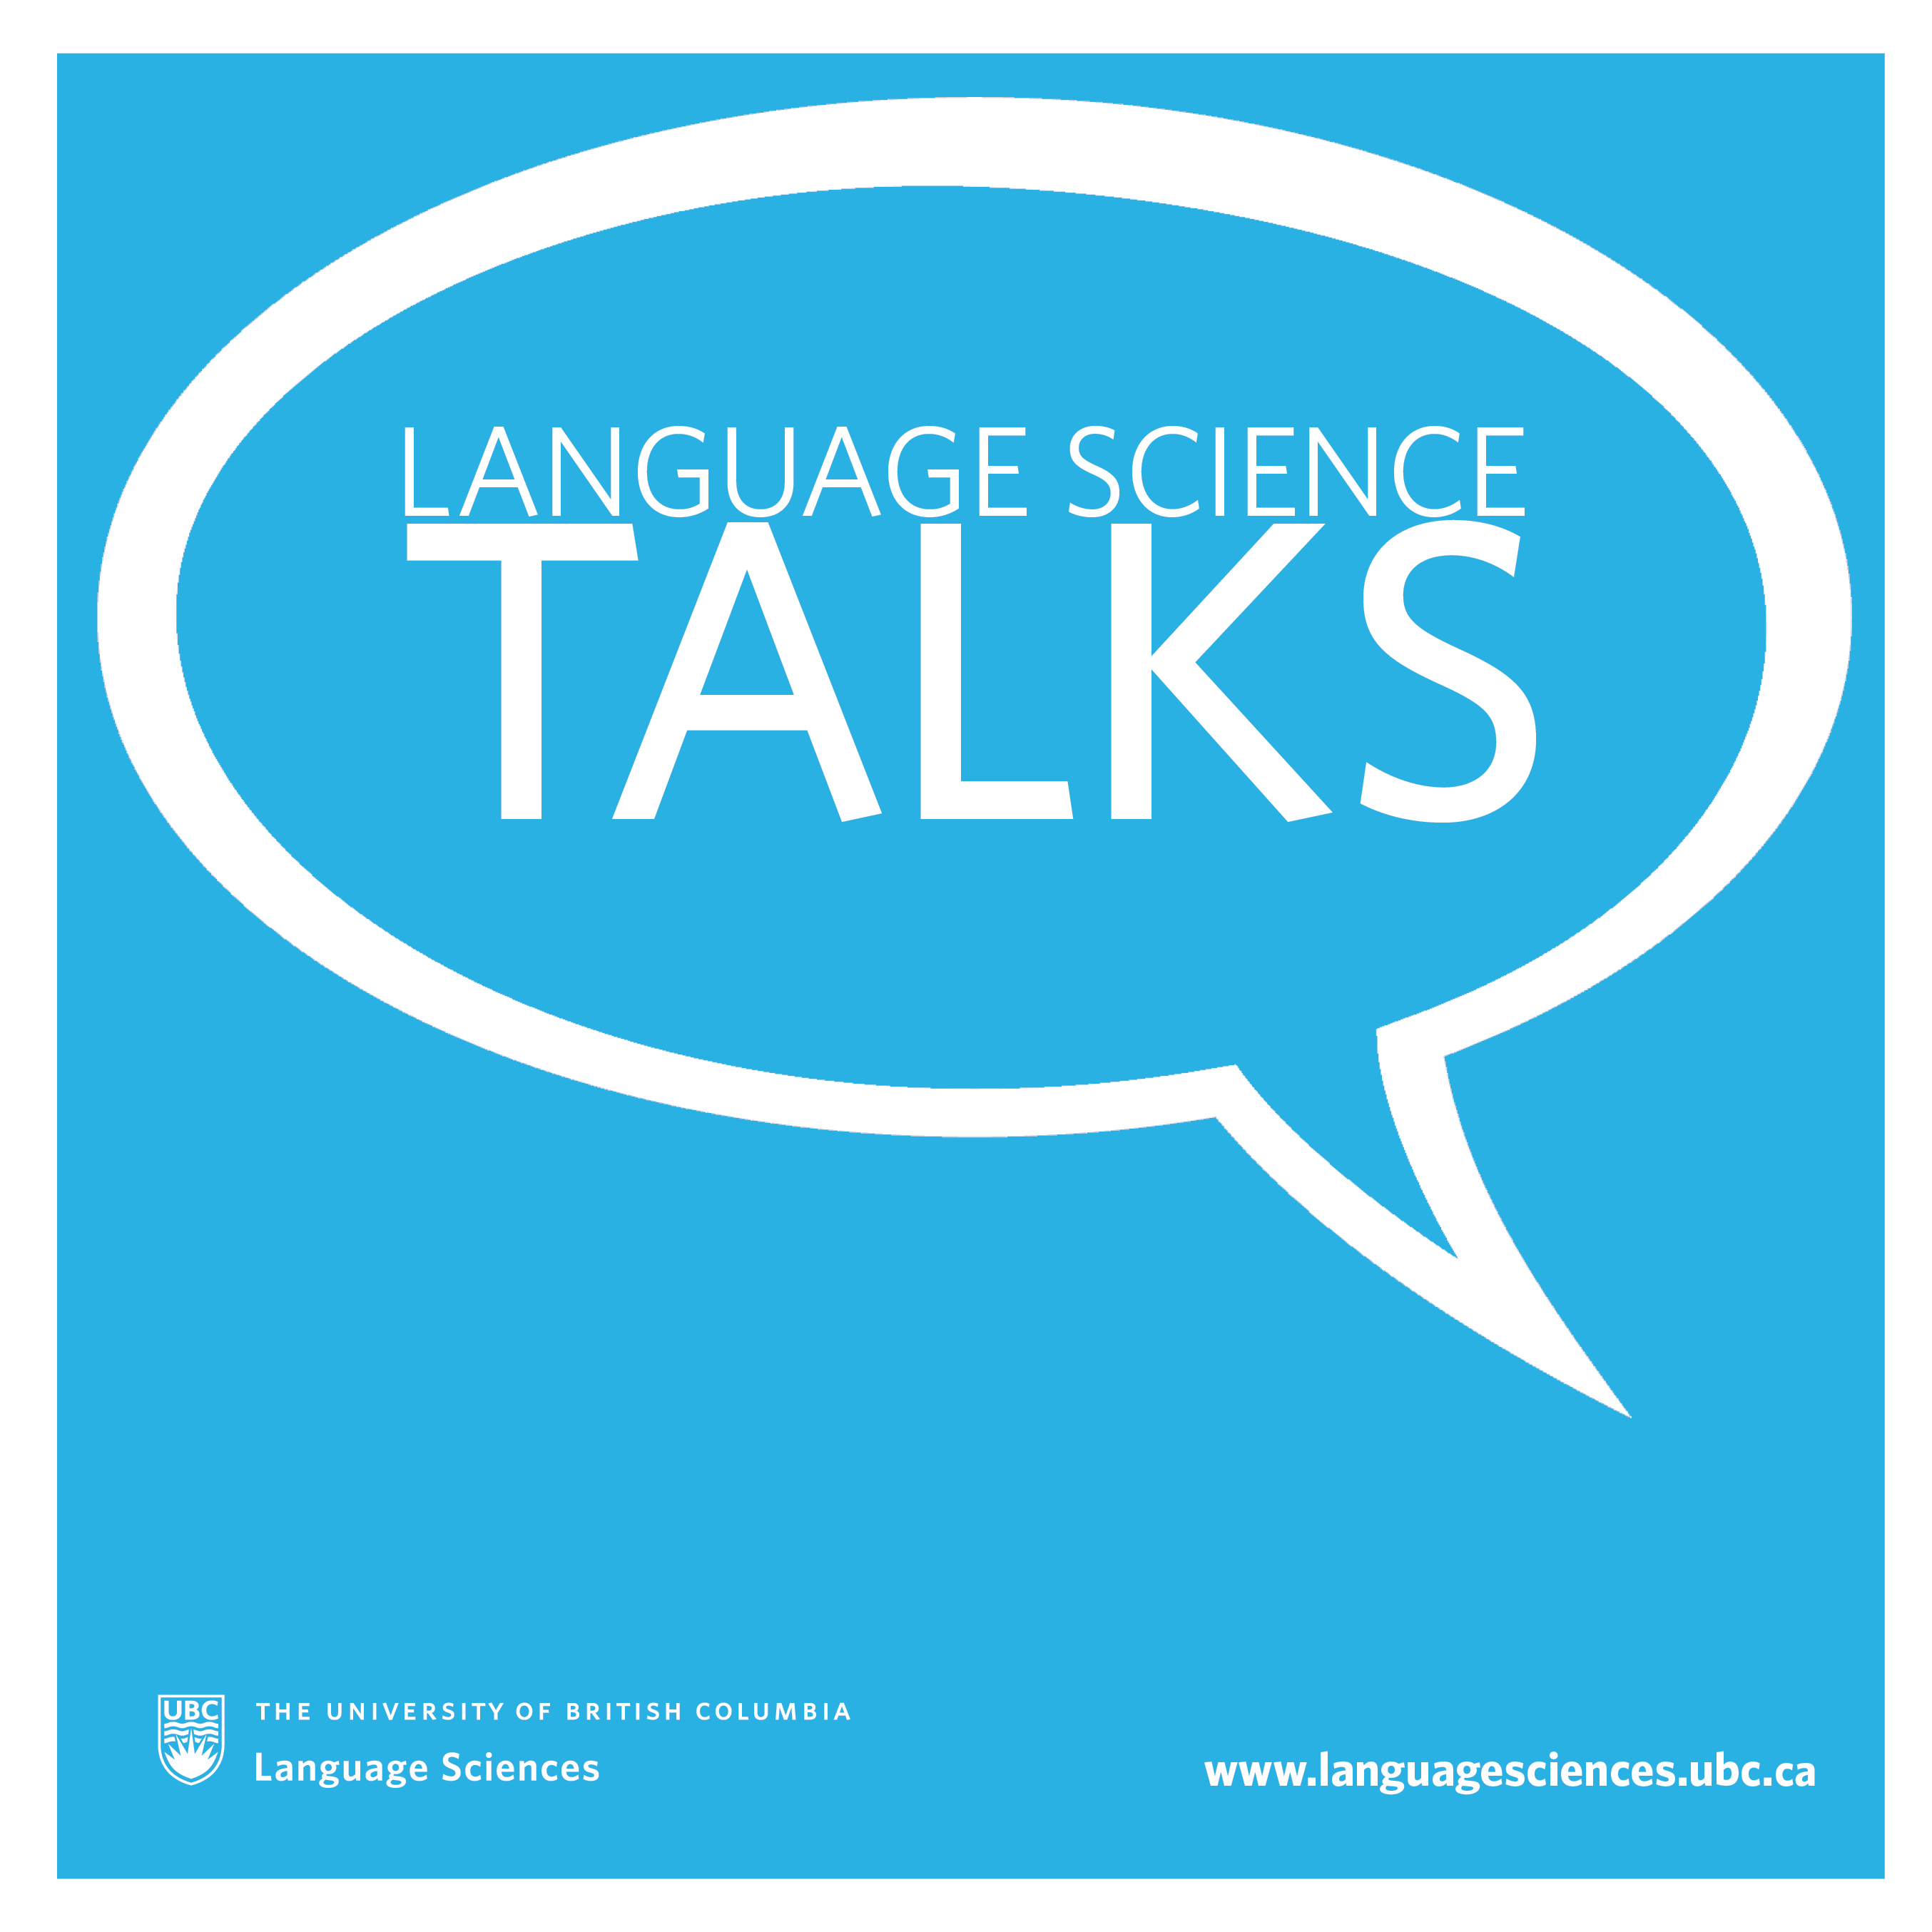 An image of the Language Science Talks logo, a white speech bubble on a light blue background, with the text Language Science Talks within the bubble